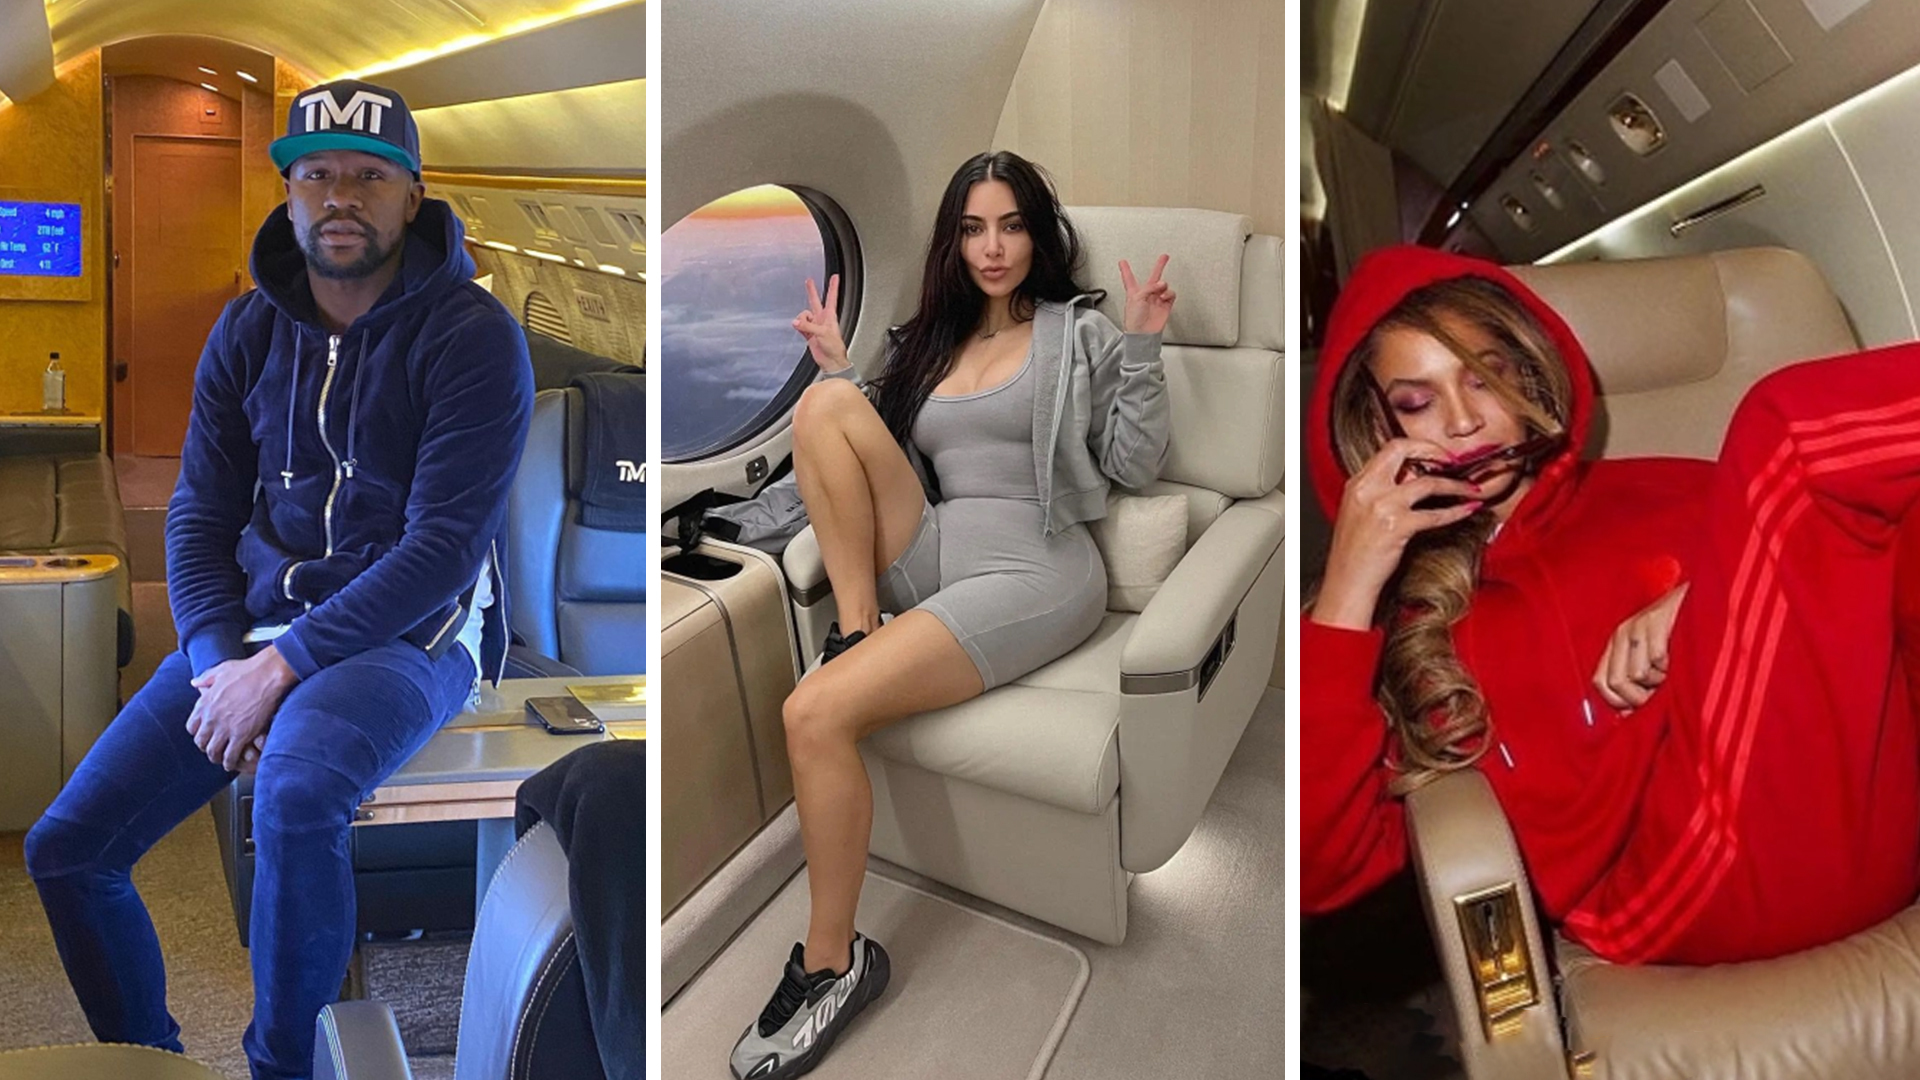 Celebrities Like Drake Are Being Criticised For Their Private Jet